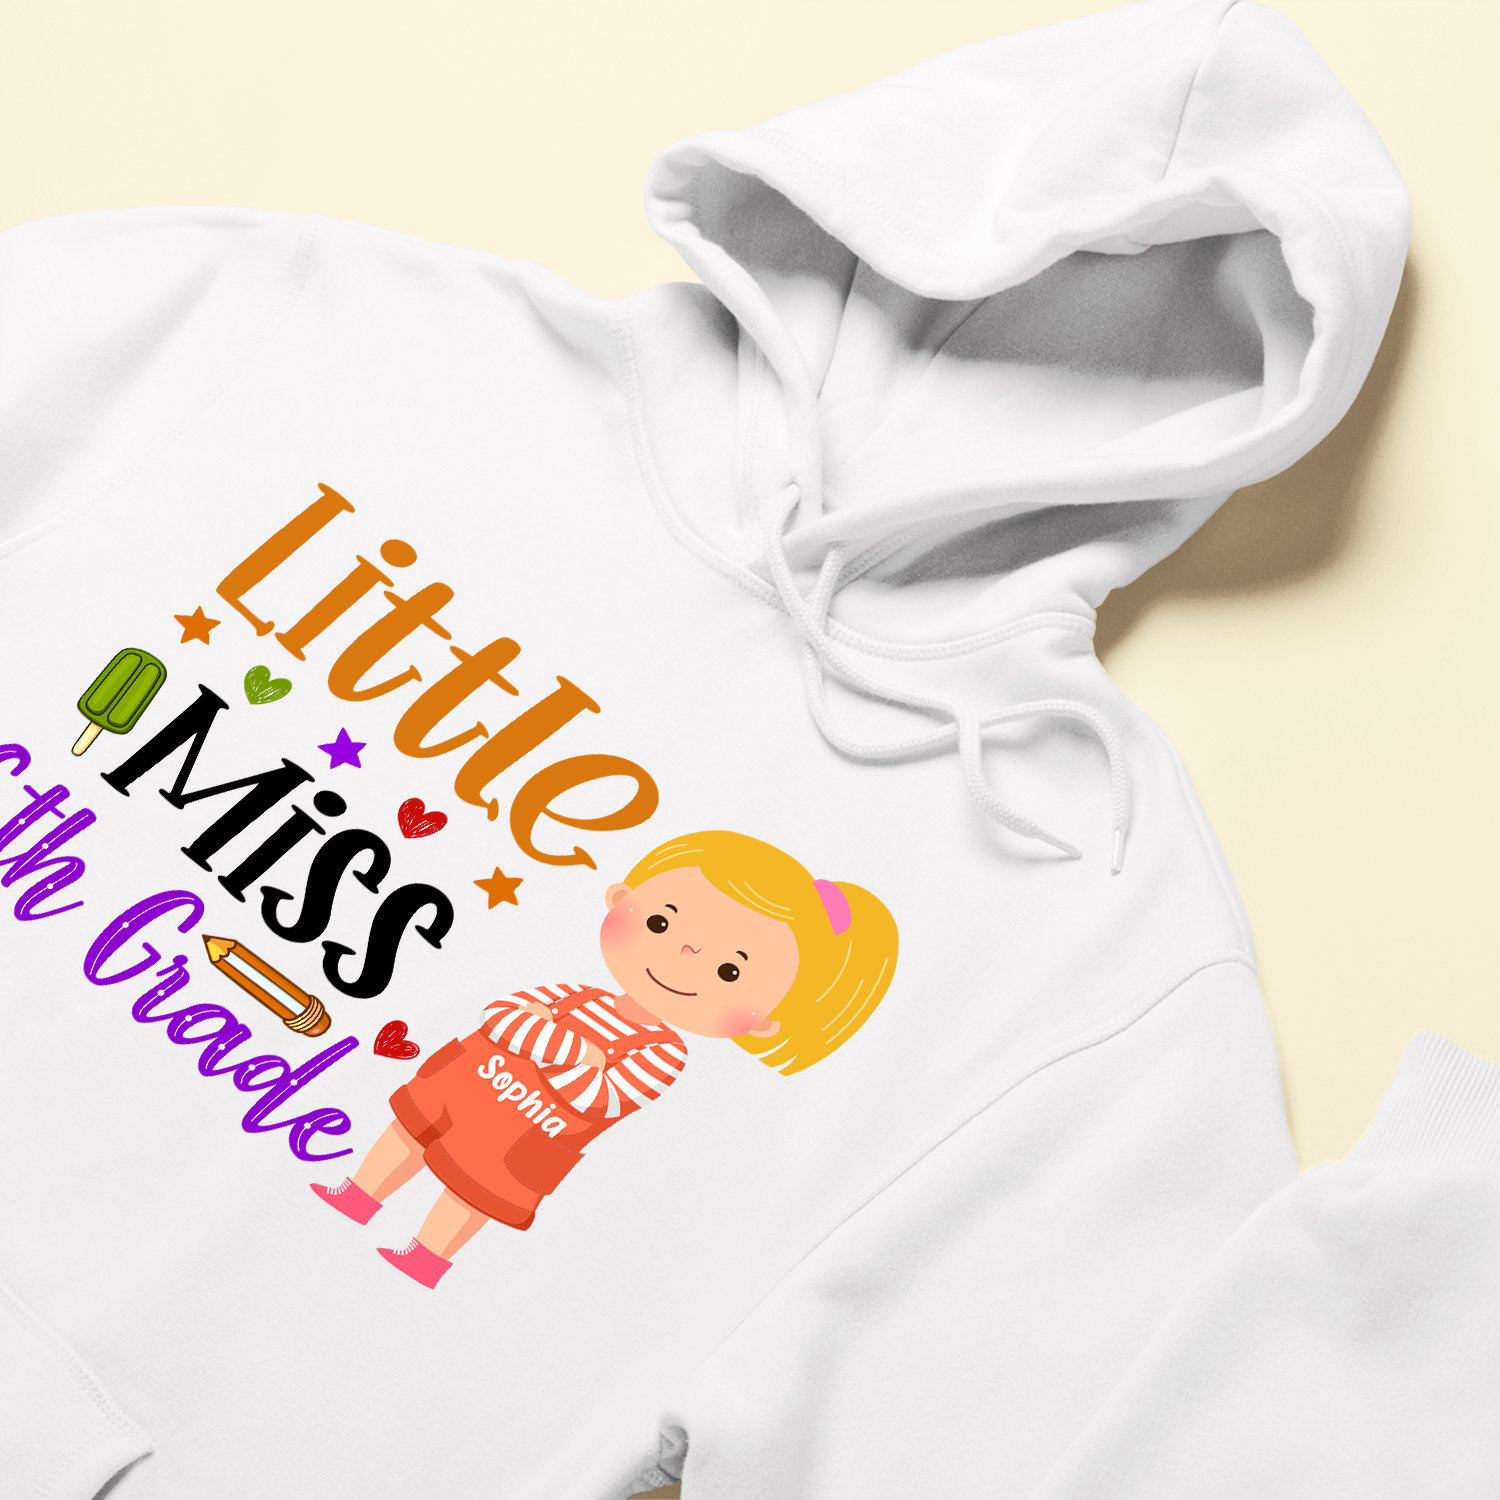 Little Miss/Mister School - Personalized Shirt - Back To SchoolGift For Student Kids, Son, Daughter